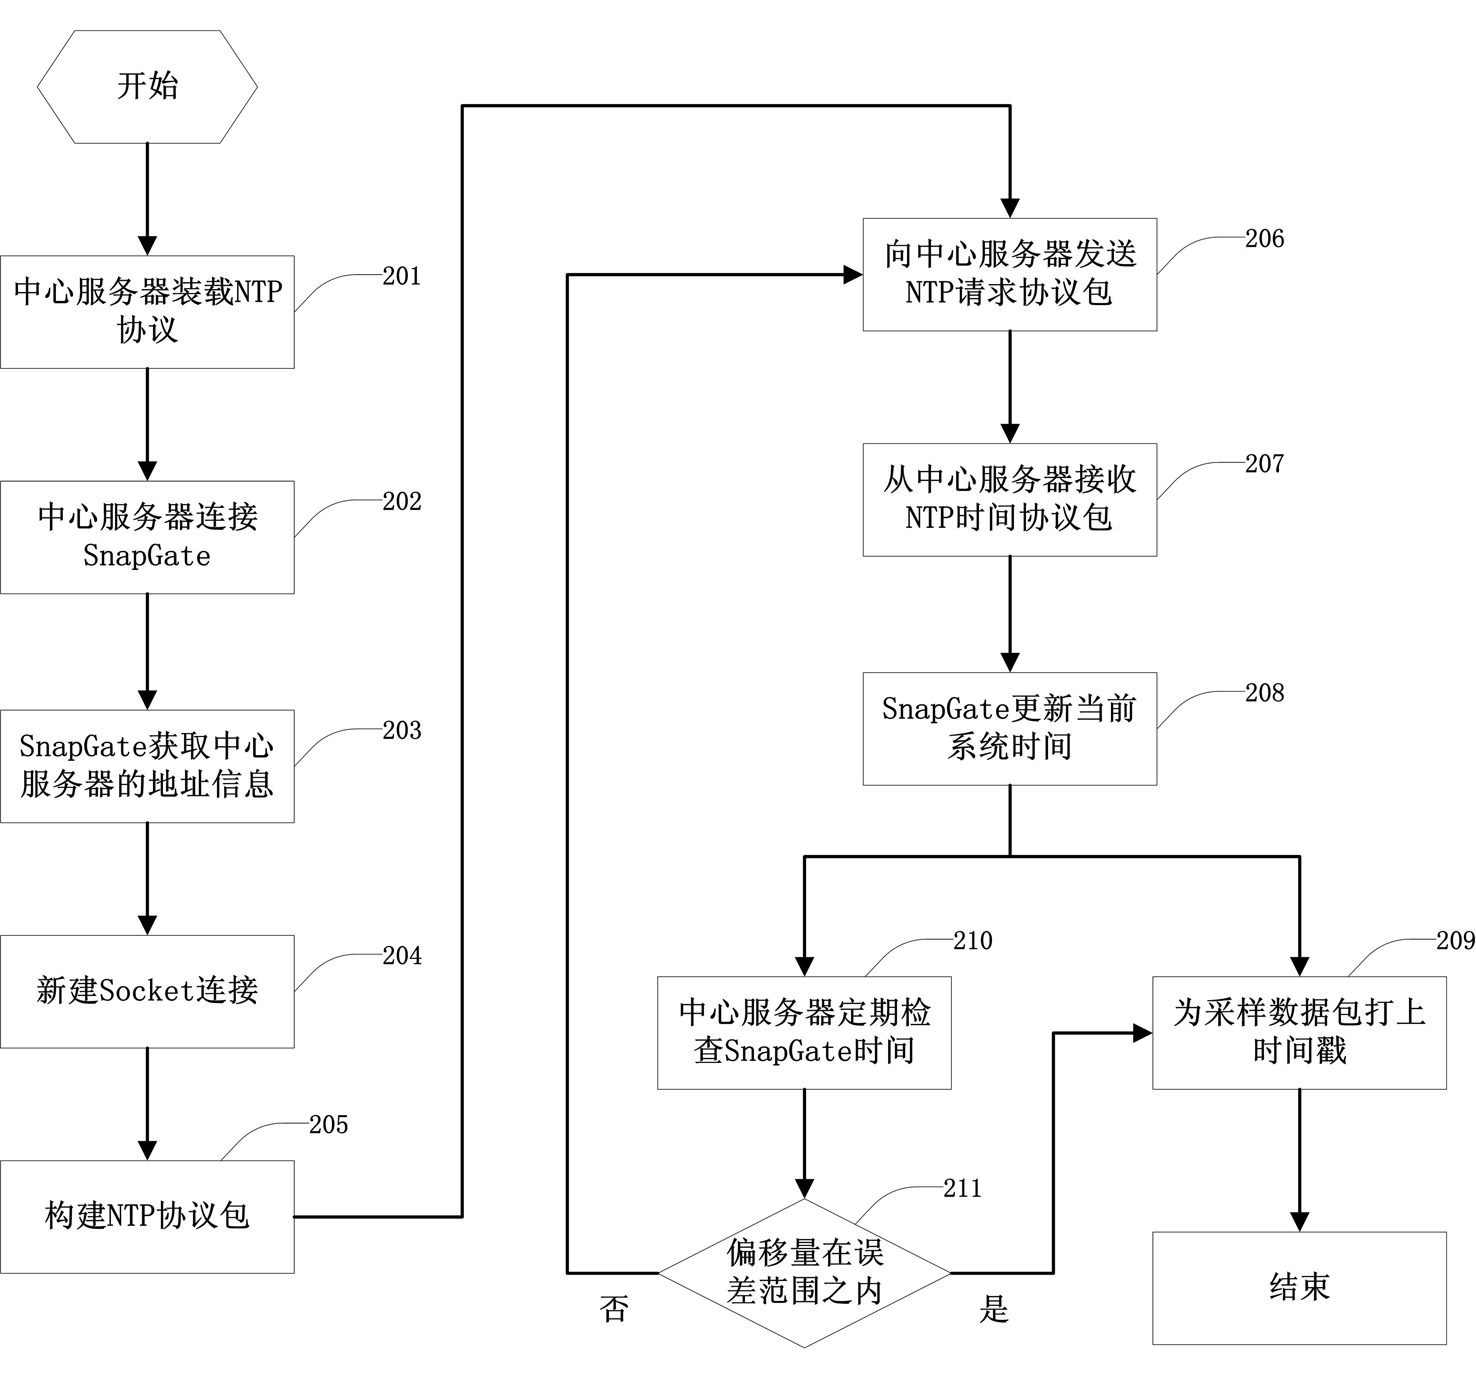 Distributed deployment method for large-scale wireless sensor network testing and debugging